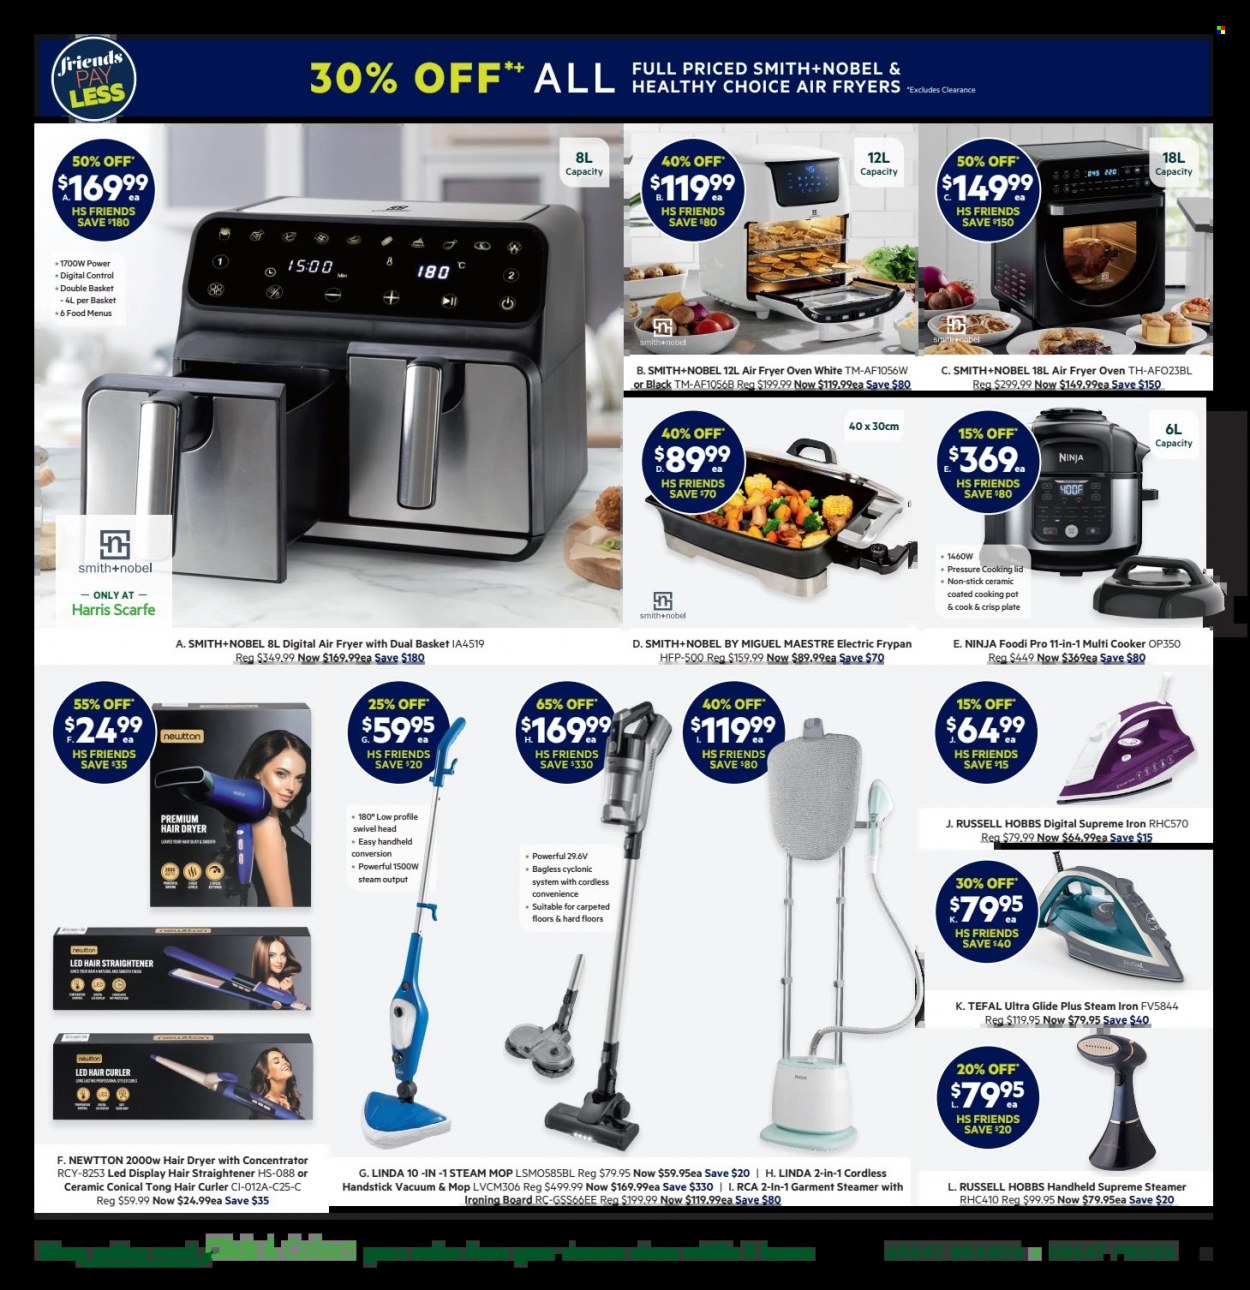 thumbnail - Harris Scarfe Catalogue - Sales products - Tefal, basket, ironing board, mop, lid, plate, pot, frying pan, Smith+Nobel, oven, handstick vacuum cleaner, multifunction cooker, Russell Hobbs, electric frypan, steam iron, steam cleaner, garment steamer, hair dryer, straightener. Page 5.